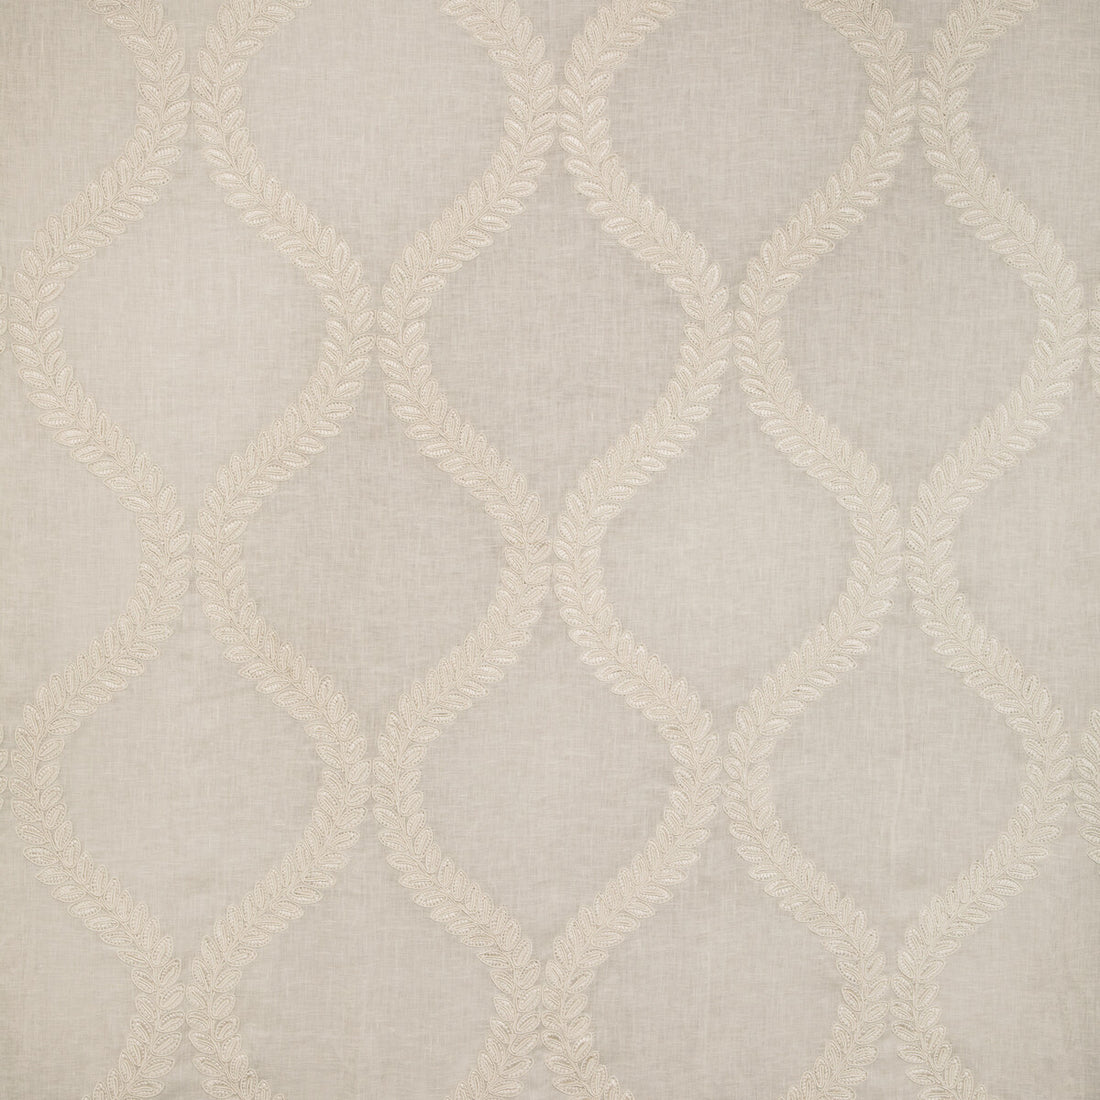 Camus Sheer fabric in ivory color - pattern 8023110.1.0 - by Brunschwig &amp; Fils in the Anduze Embroideries collection